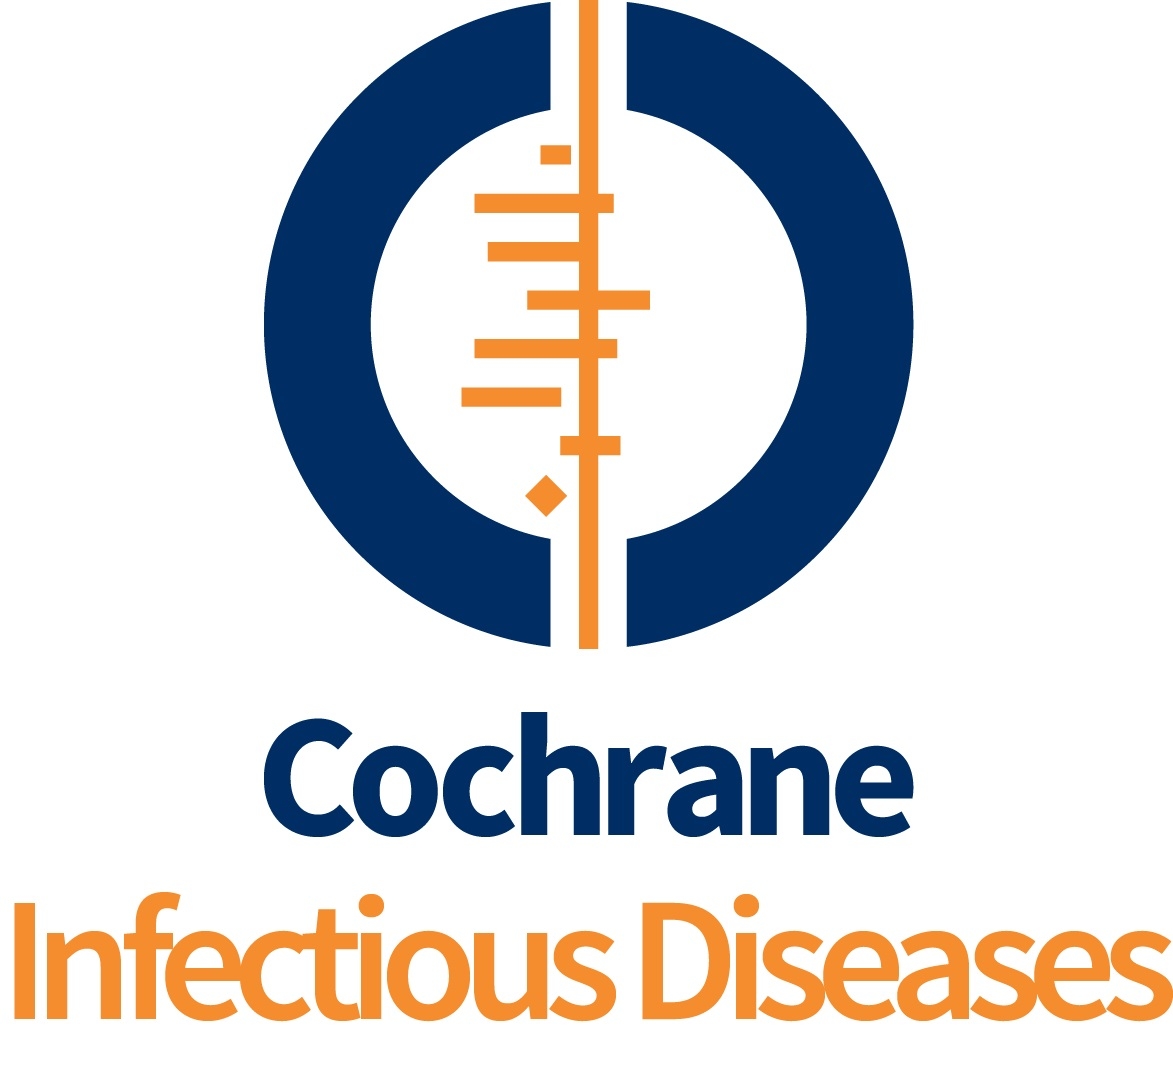 The logo of the Cochrane Infectious Disease Group